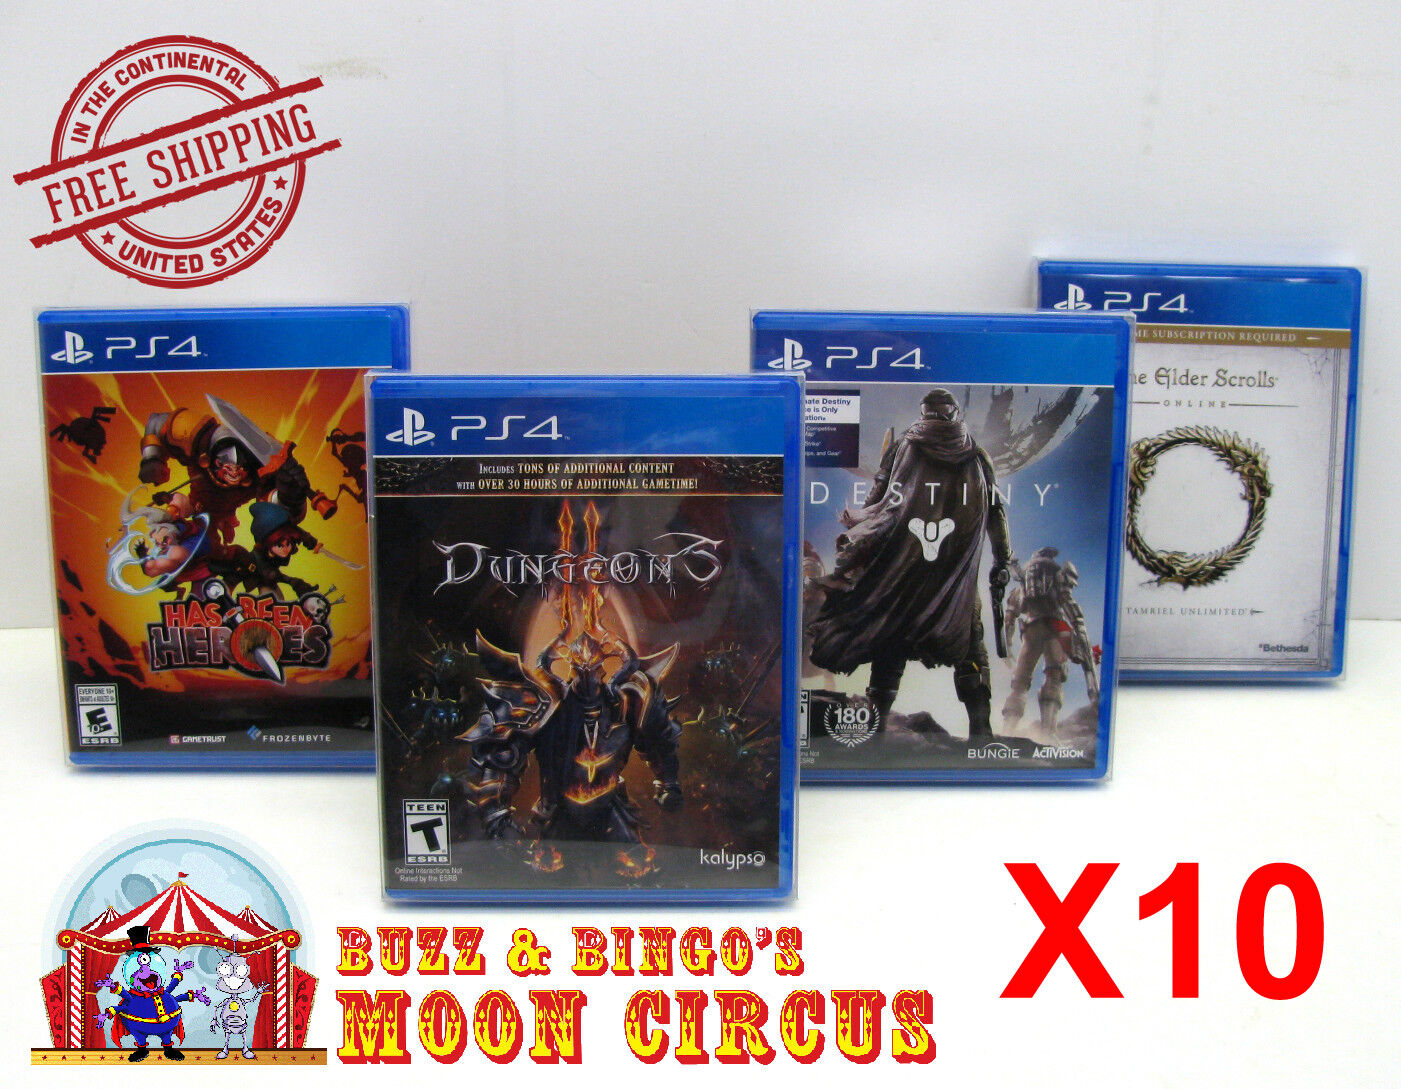 10X SONY PLAYSTATION PS4 CIB GAME -CLEAR PLASTIC PROTECTIVE BOX PROTECTORS CASE  Dr. Retro Does Not Apply